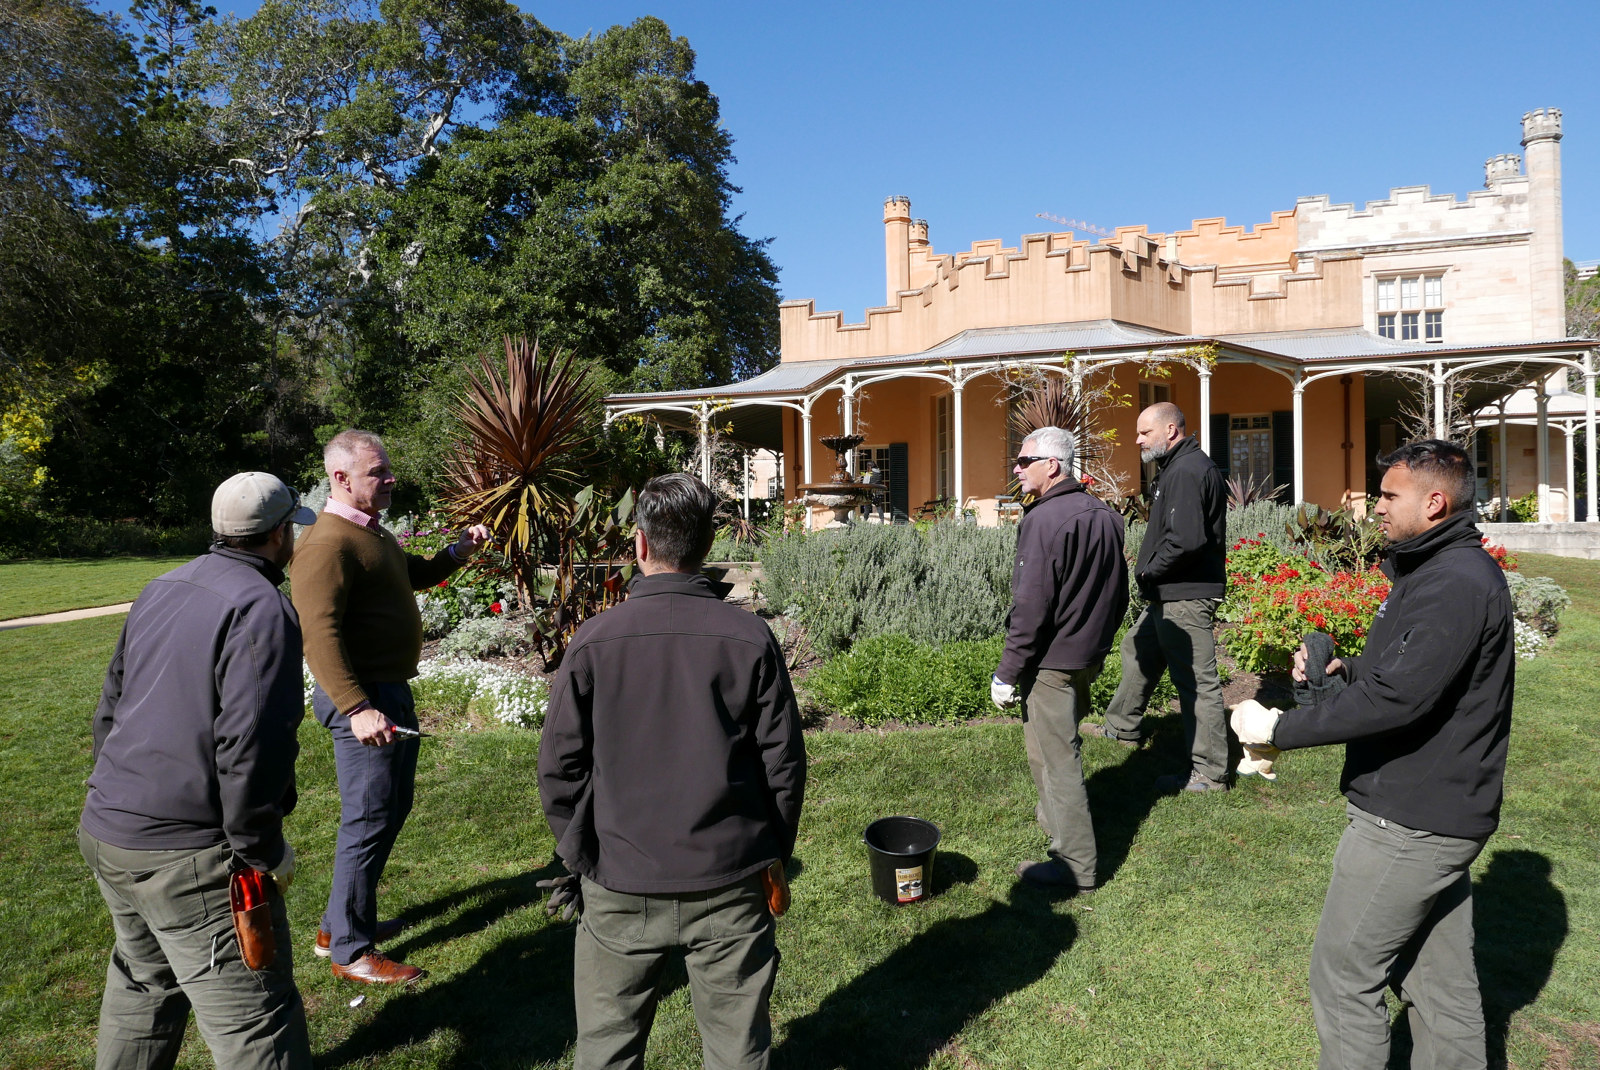 Ian Innes and the horticulture team discussing rose pruning techniques in front of Vaucluse Hosue